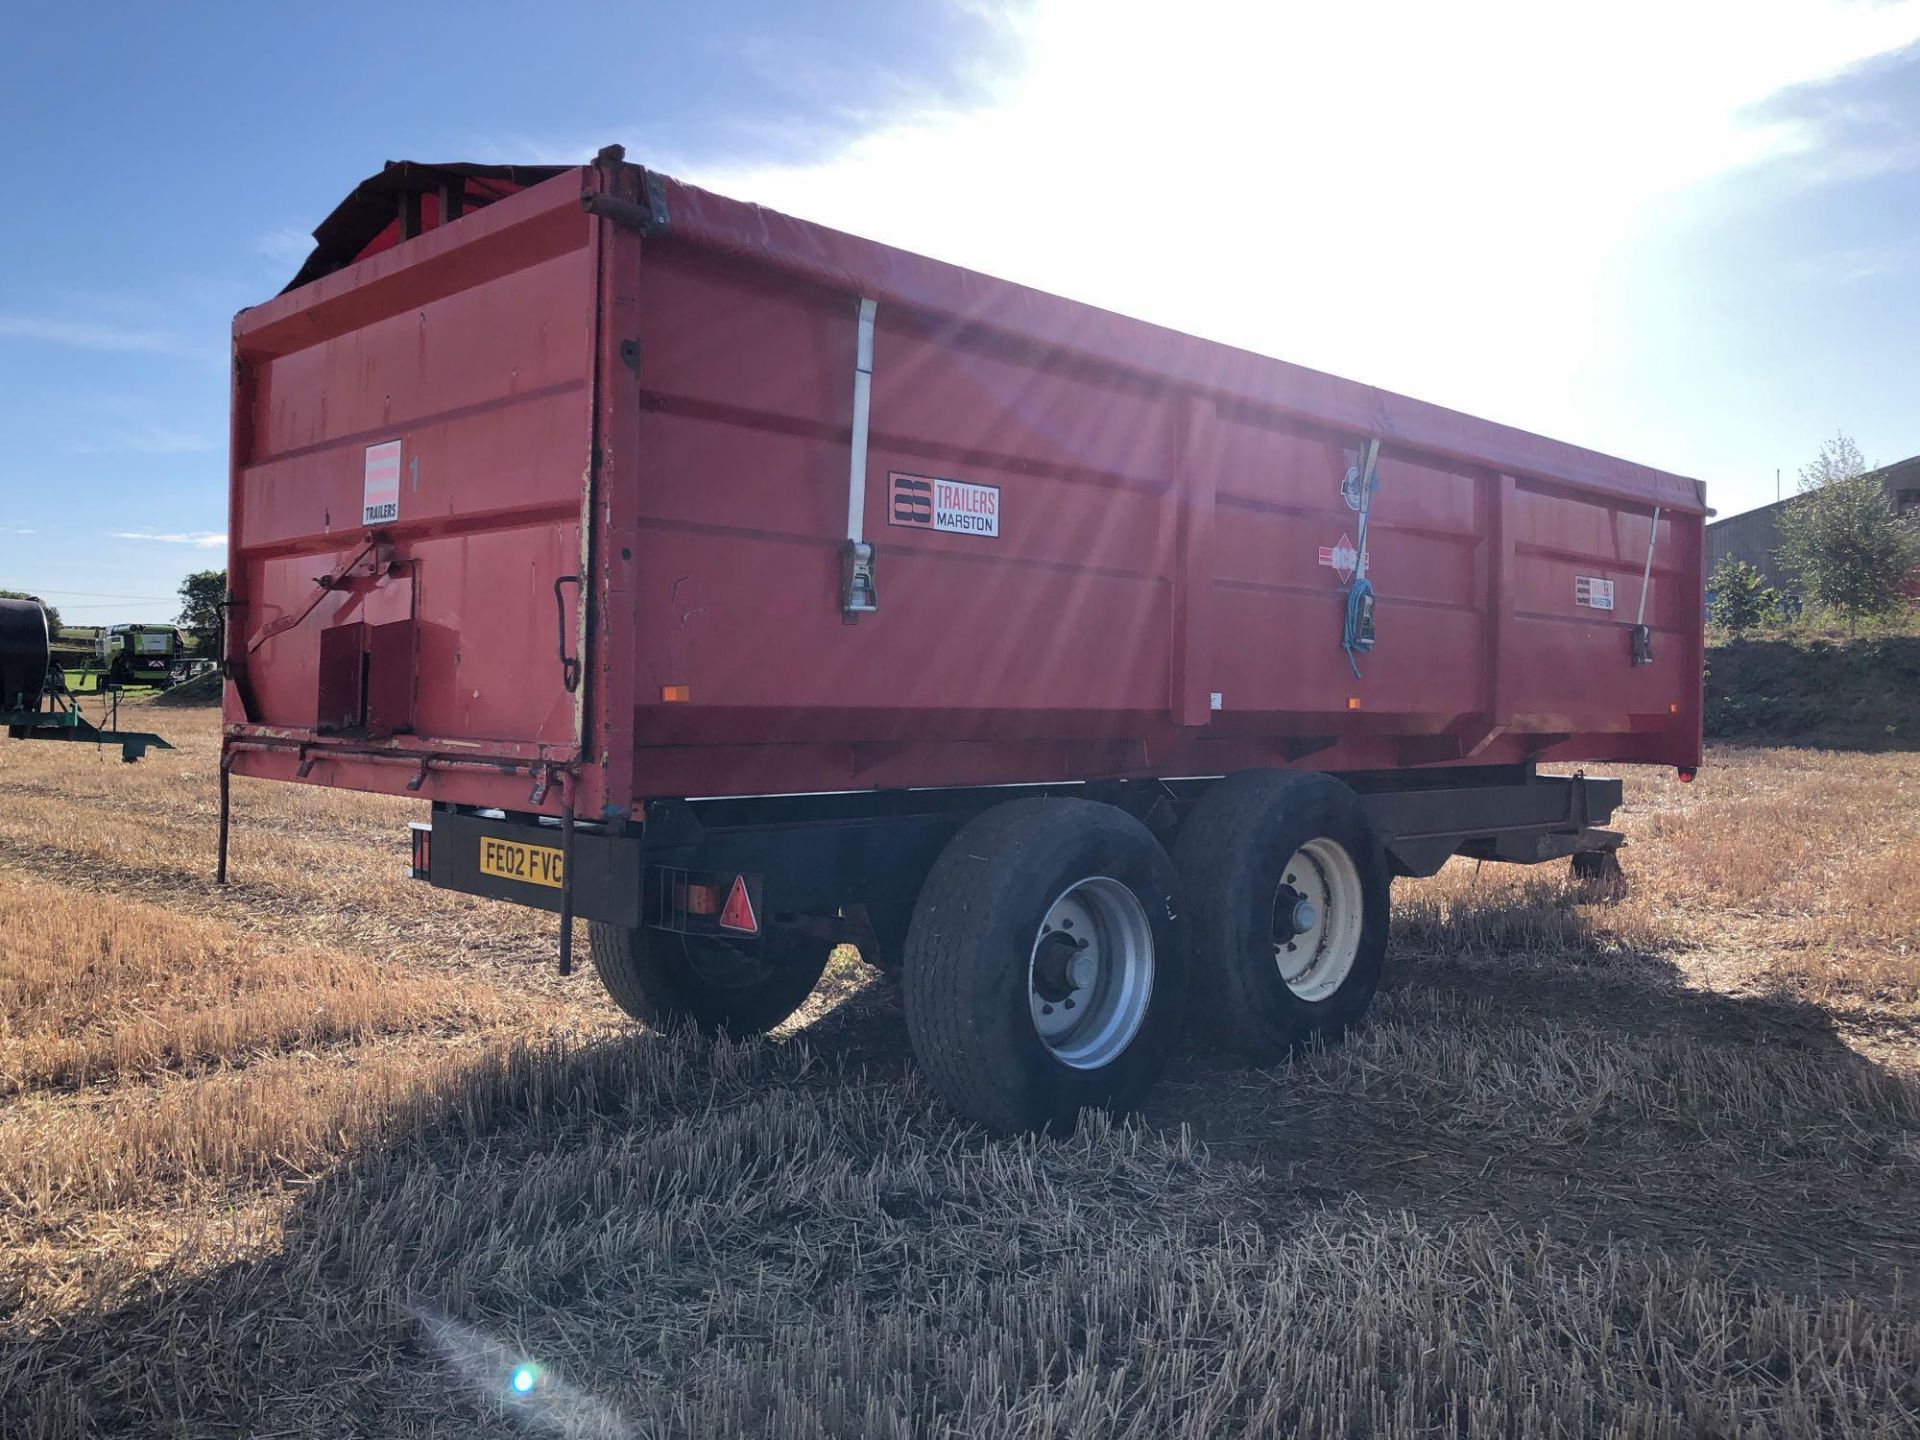 1995 AS Marston ACE FF14T twin axle grain trailer with sprung drawbar, manual tailgate and grain chu - Image 4 of 7